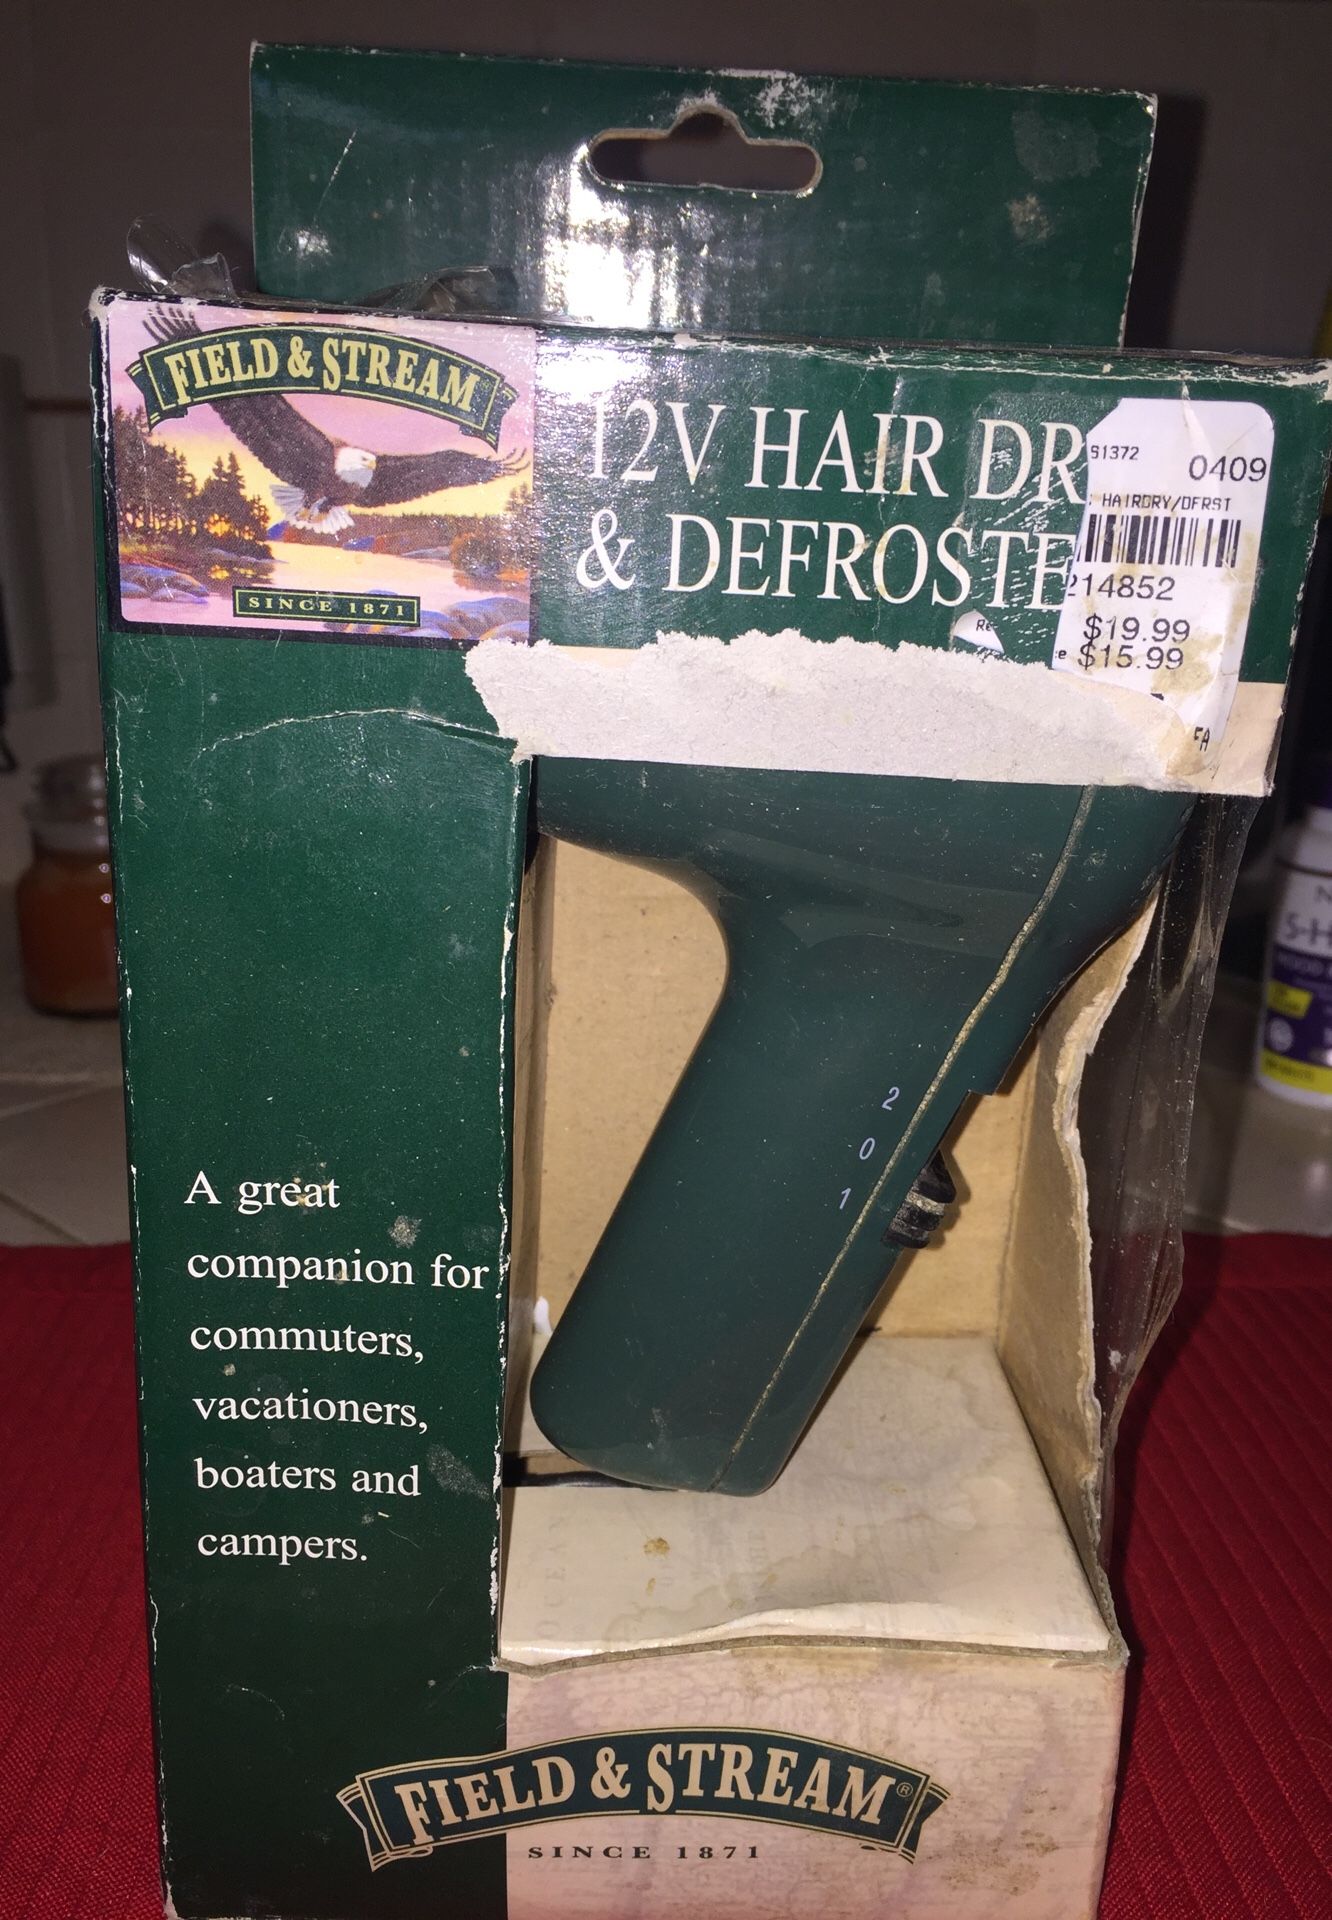 Field & stream 12v hair dryer & defroster. Great for camping